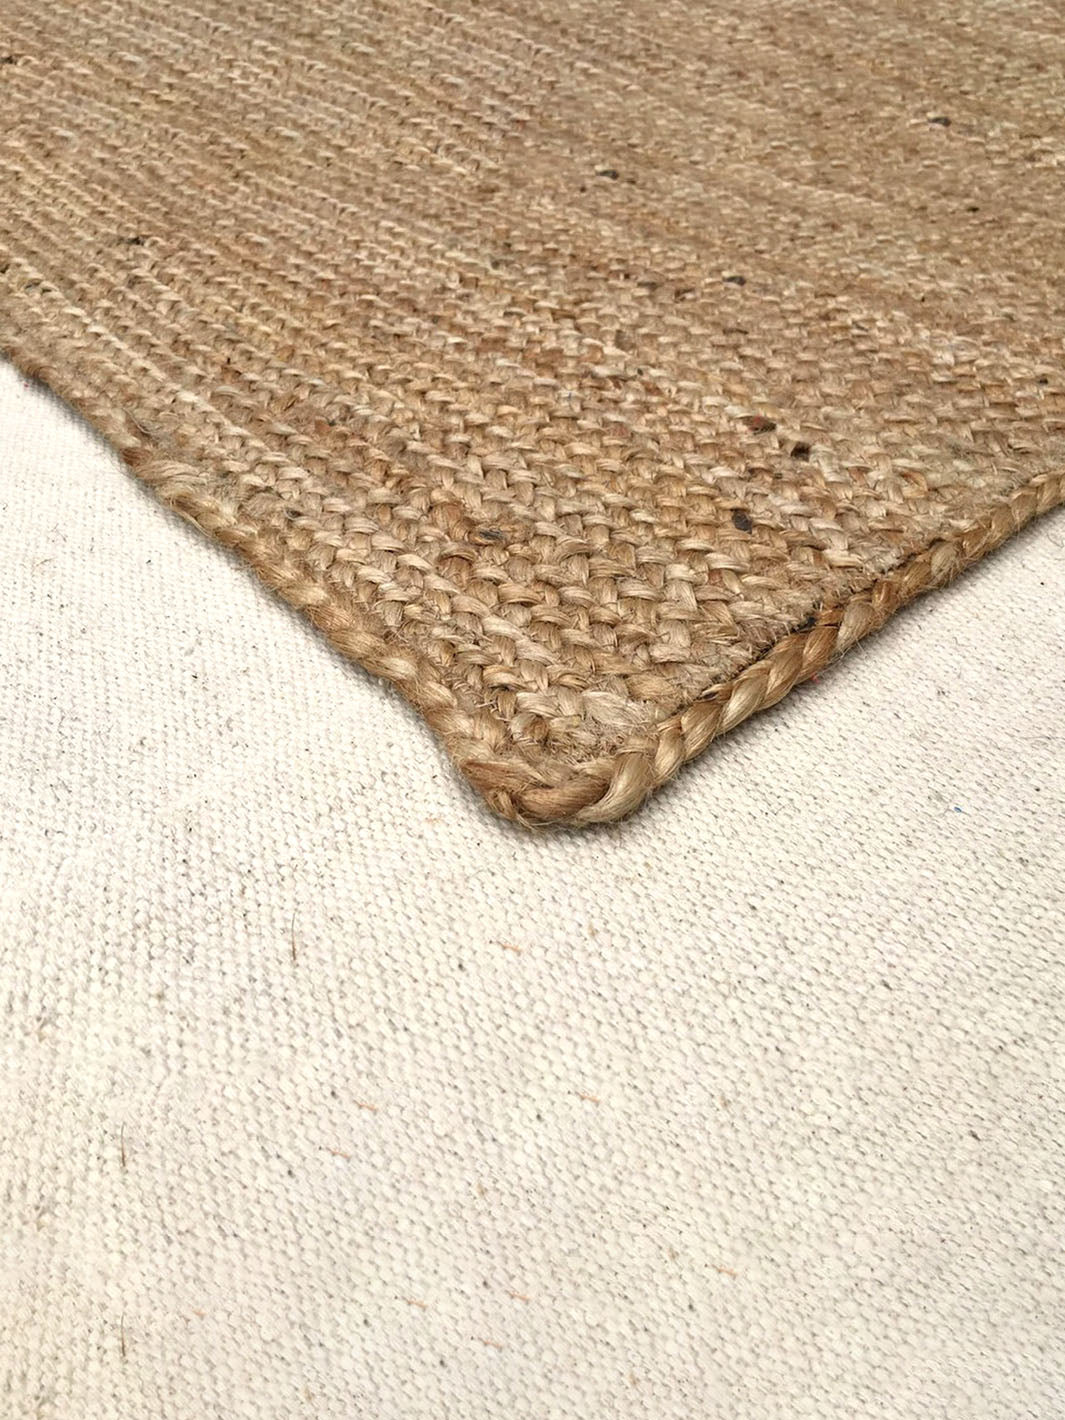 Handcrafted Braided Square Jute Rug Chouhan Rugs CRH0219-6